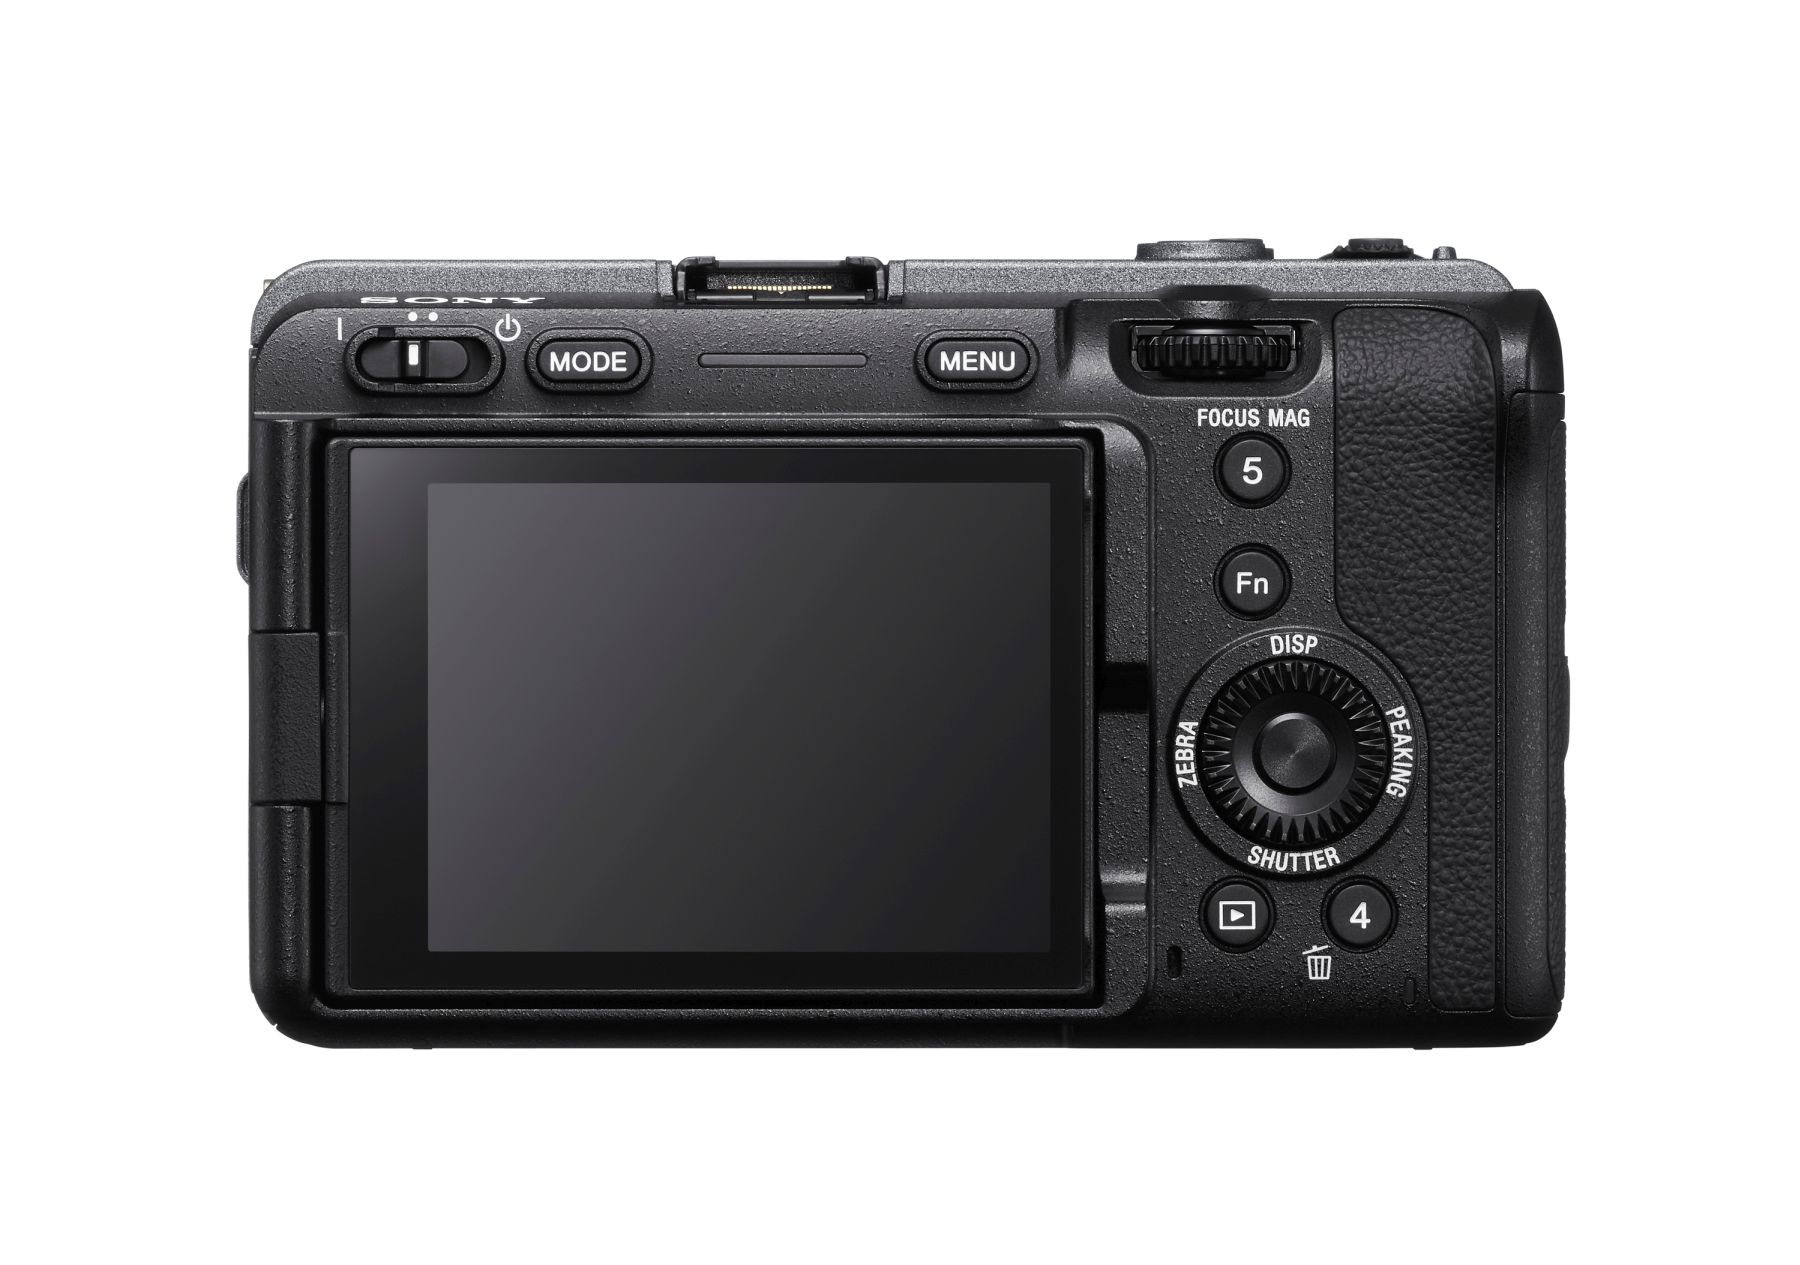 The brand's most compact and lightweight cinema line camera, the Sony FX3 promises to be a popular choice with travelers seeking cinematic freedom.